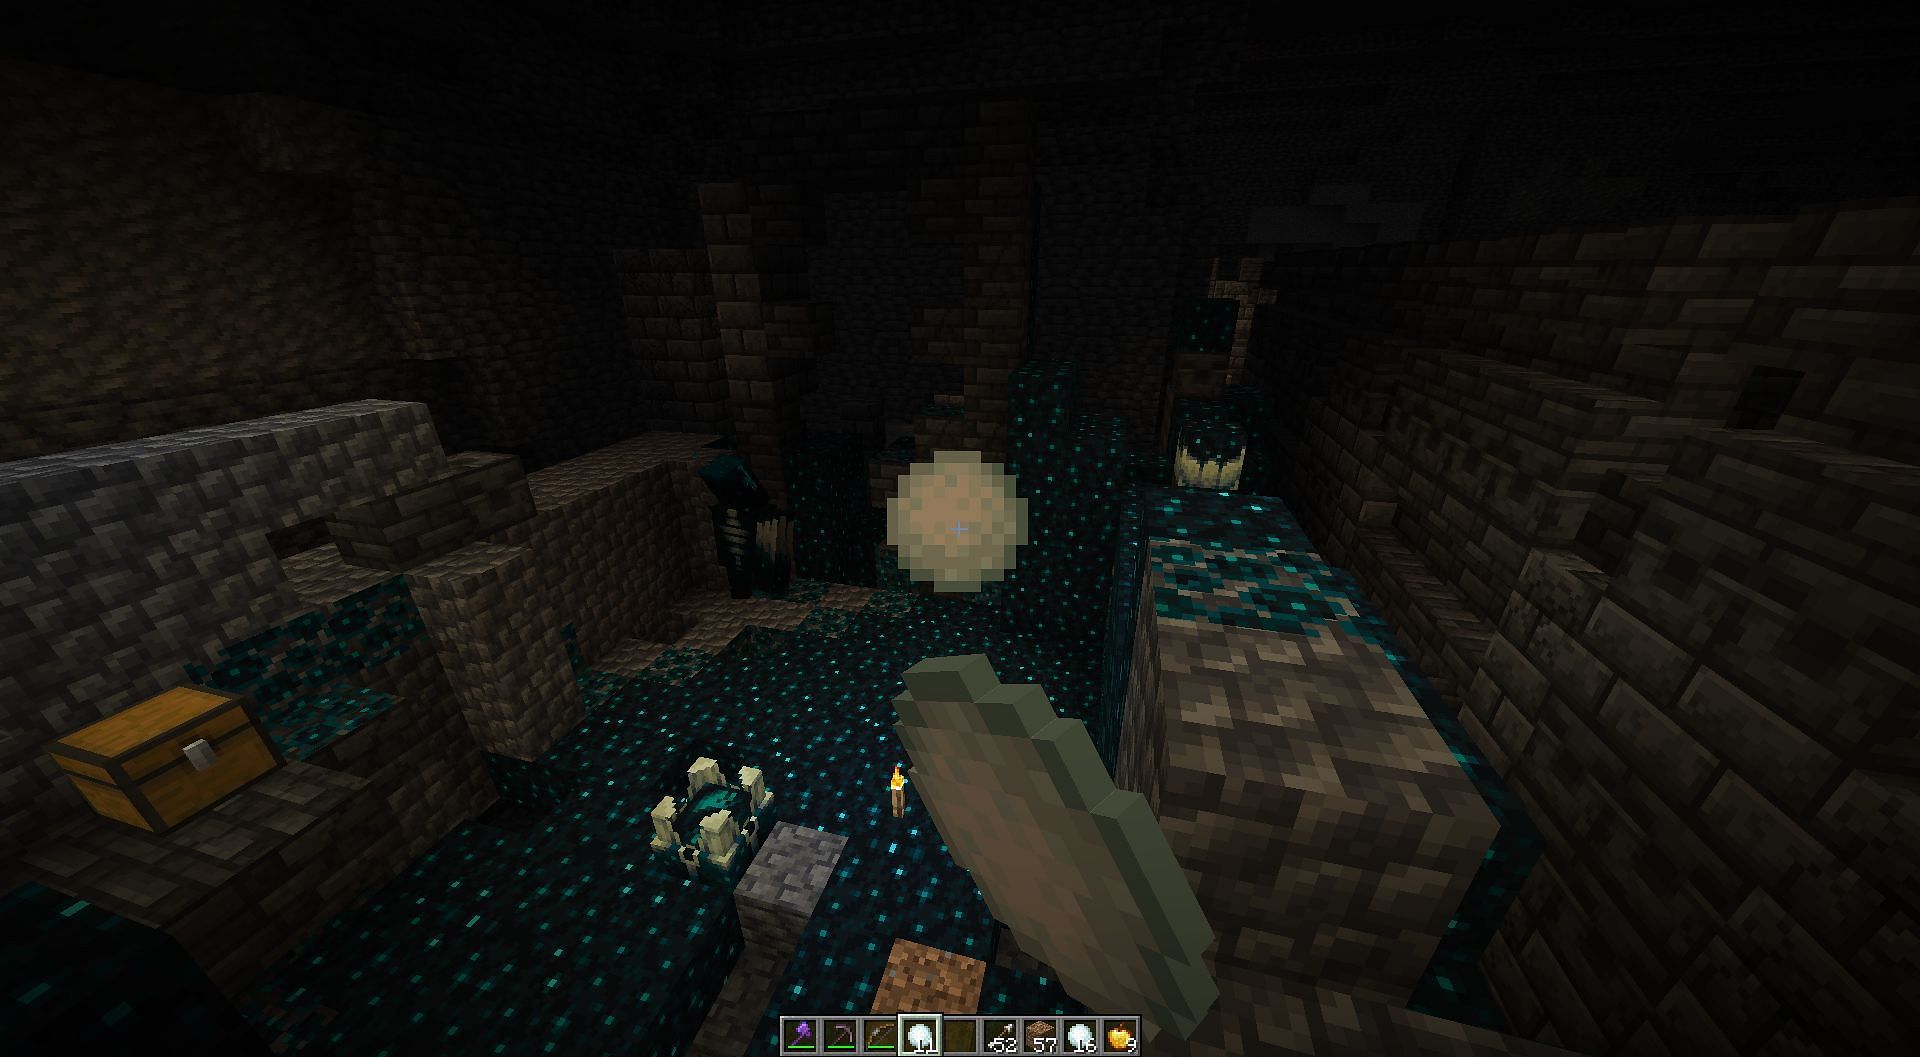 Players can throw snowballs to make a sound and distract the mob (Image via Minecraft 1.19 snapshot)